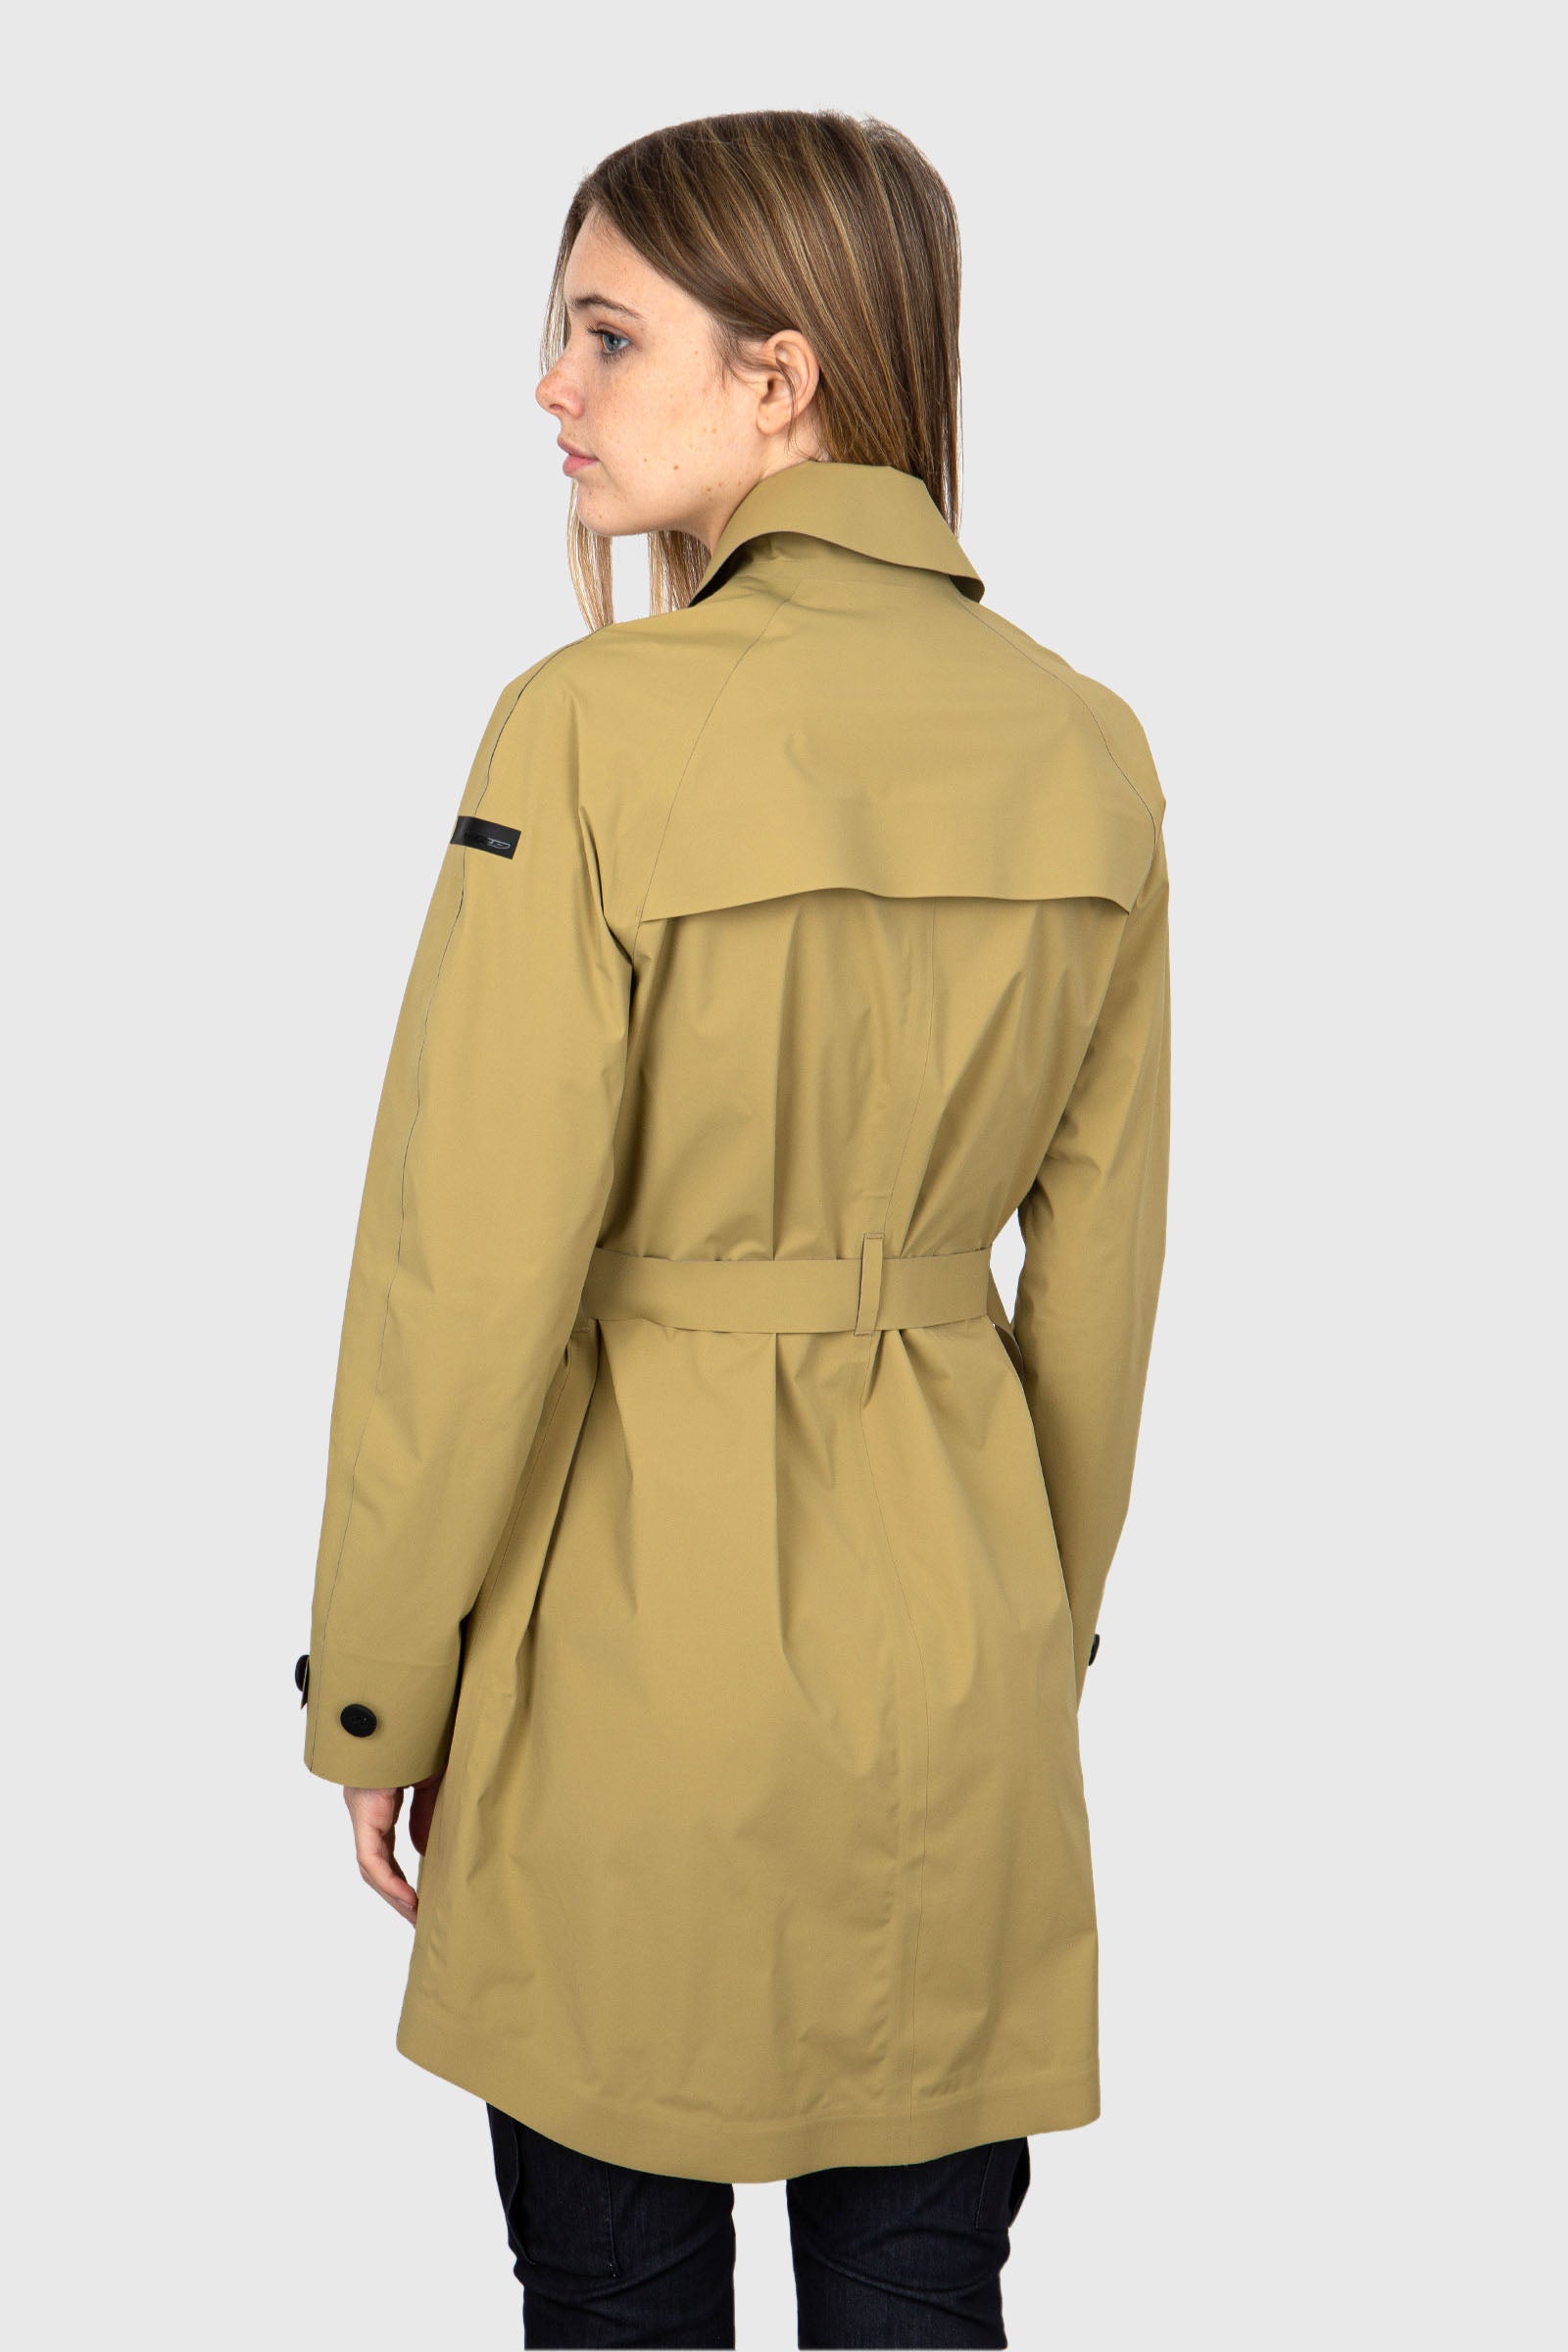 RRD Synthetic Tech Pack Trench in Tobacco - 4